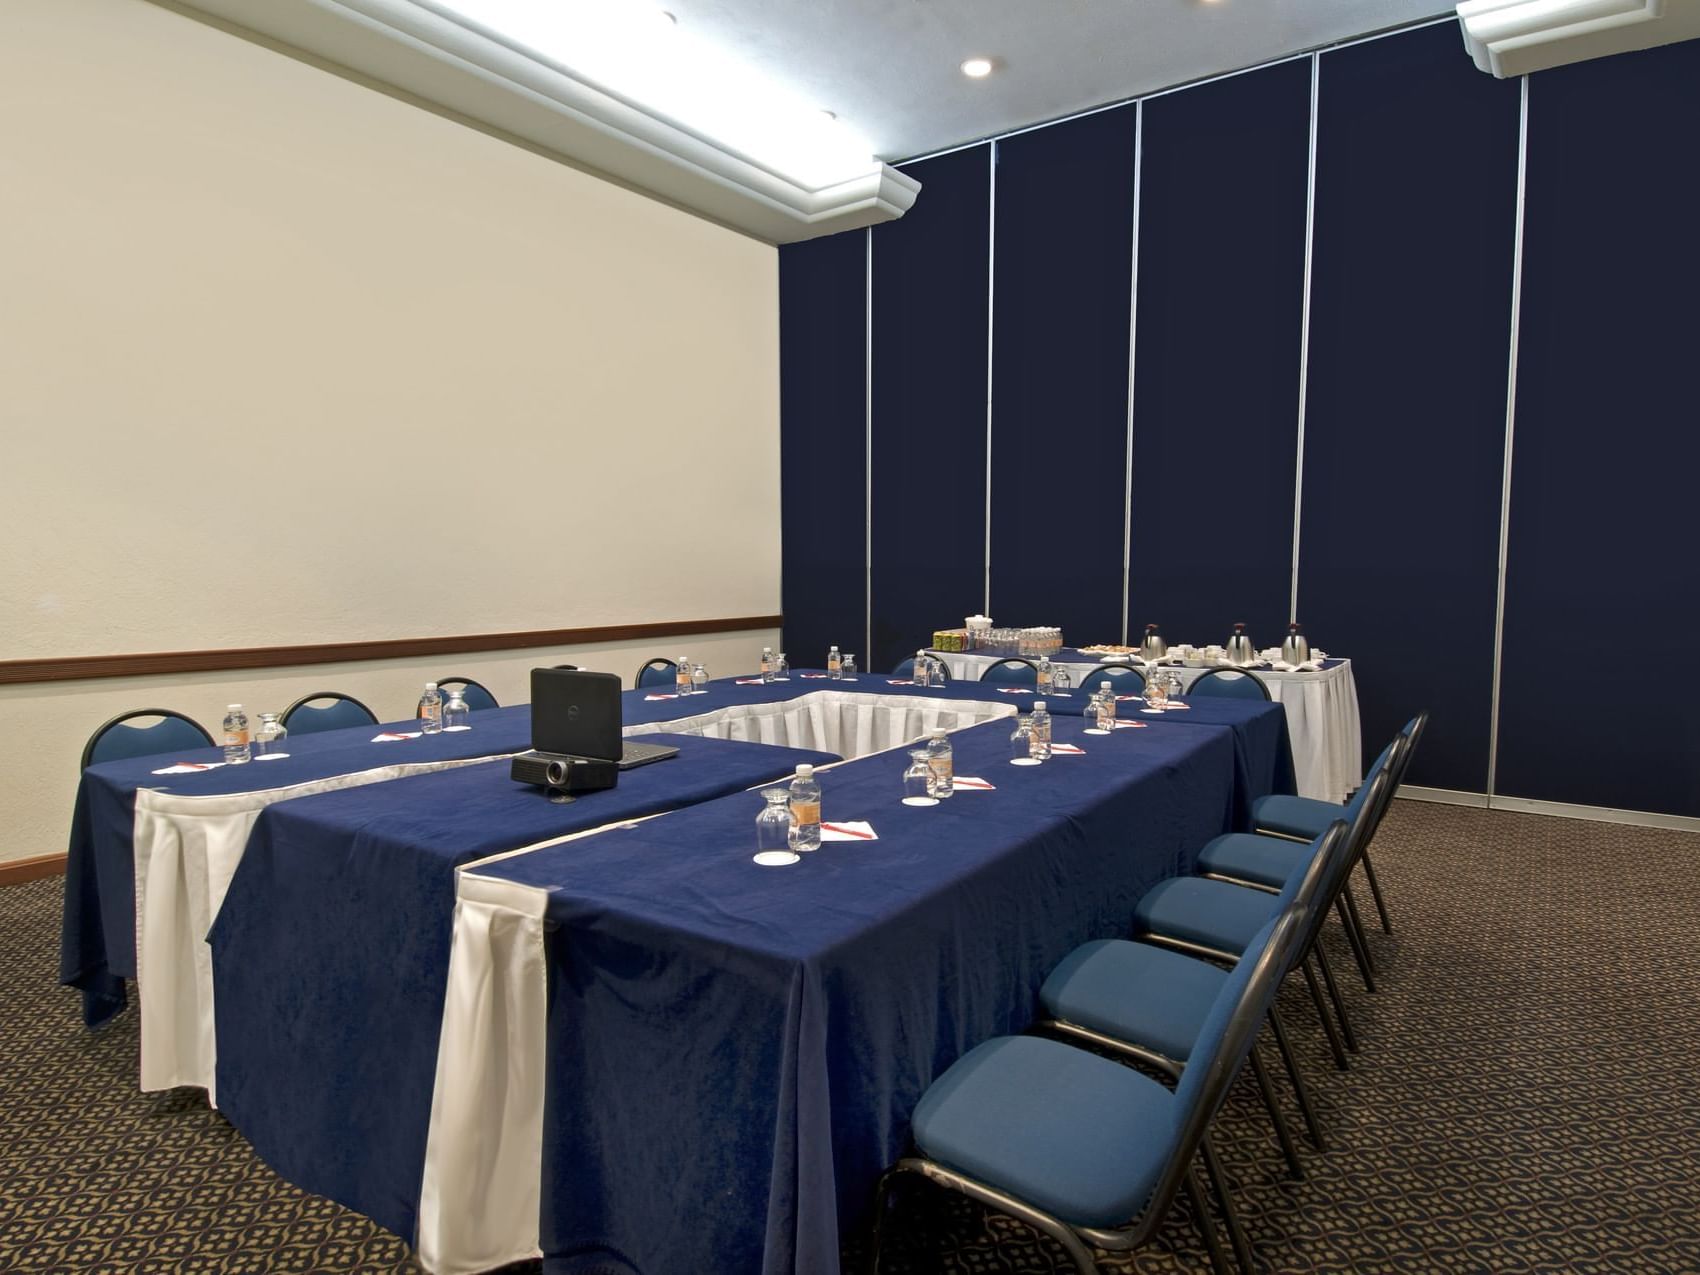 Conference table set up in a meeting room at Fiesta Inn Hotels